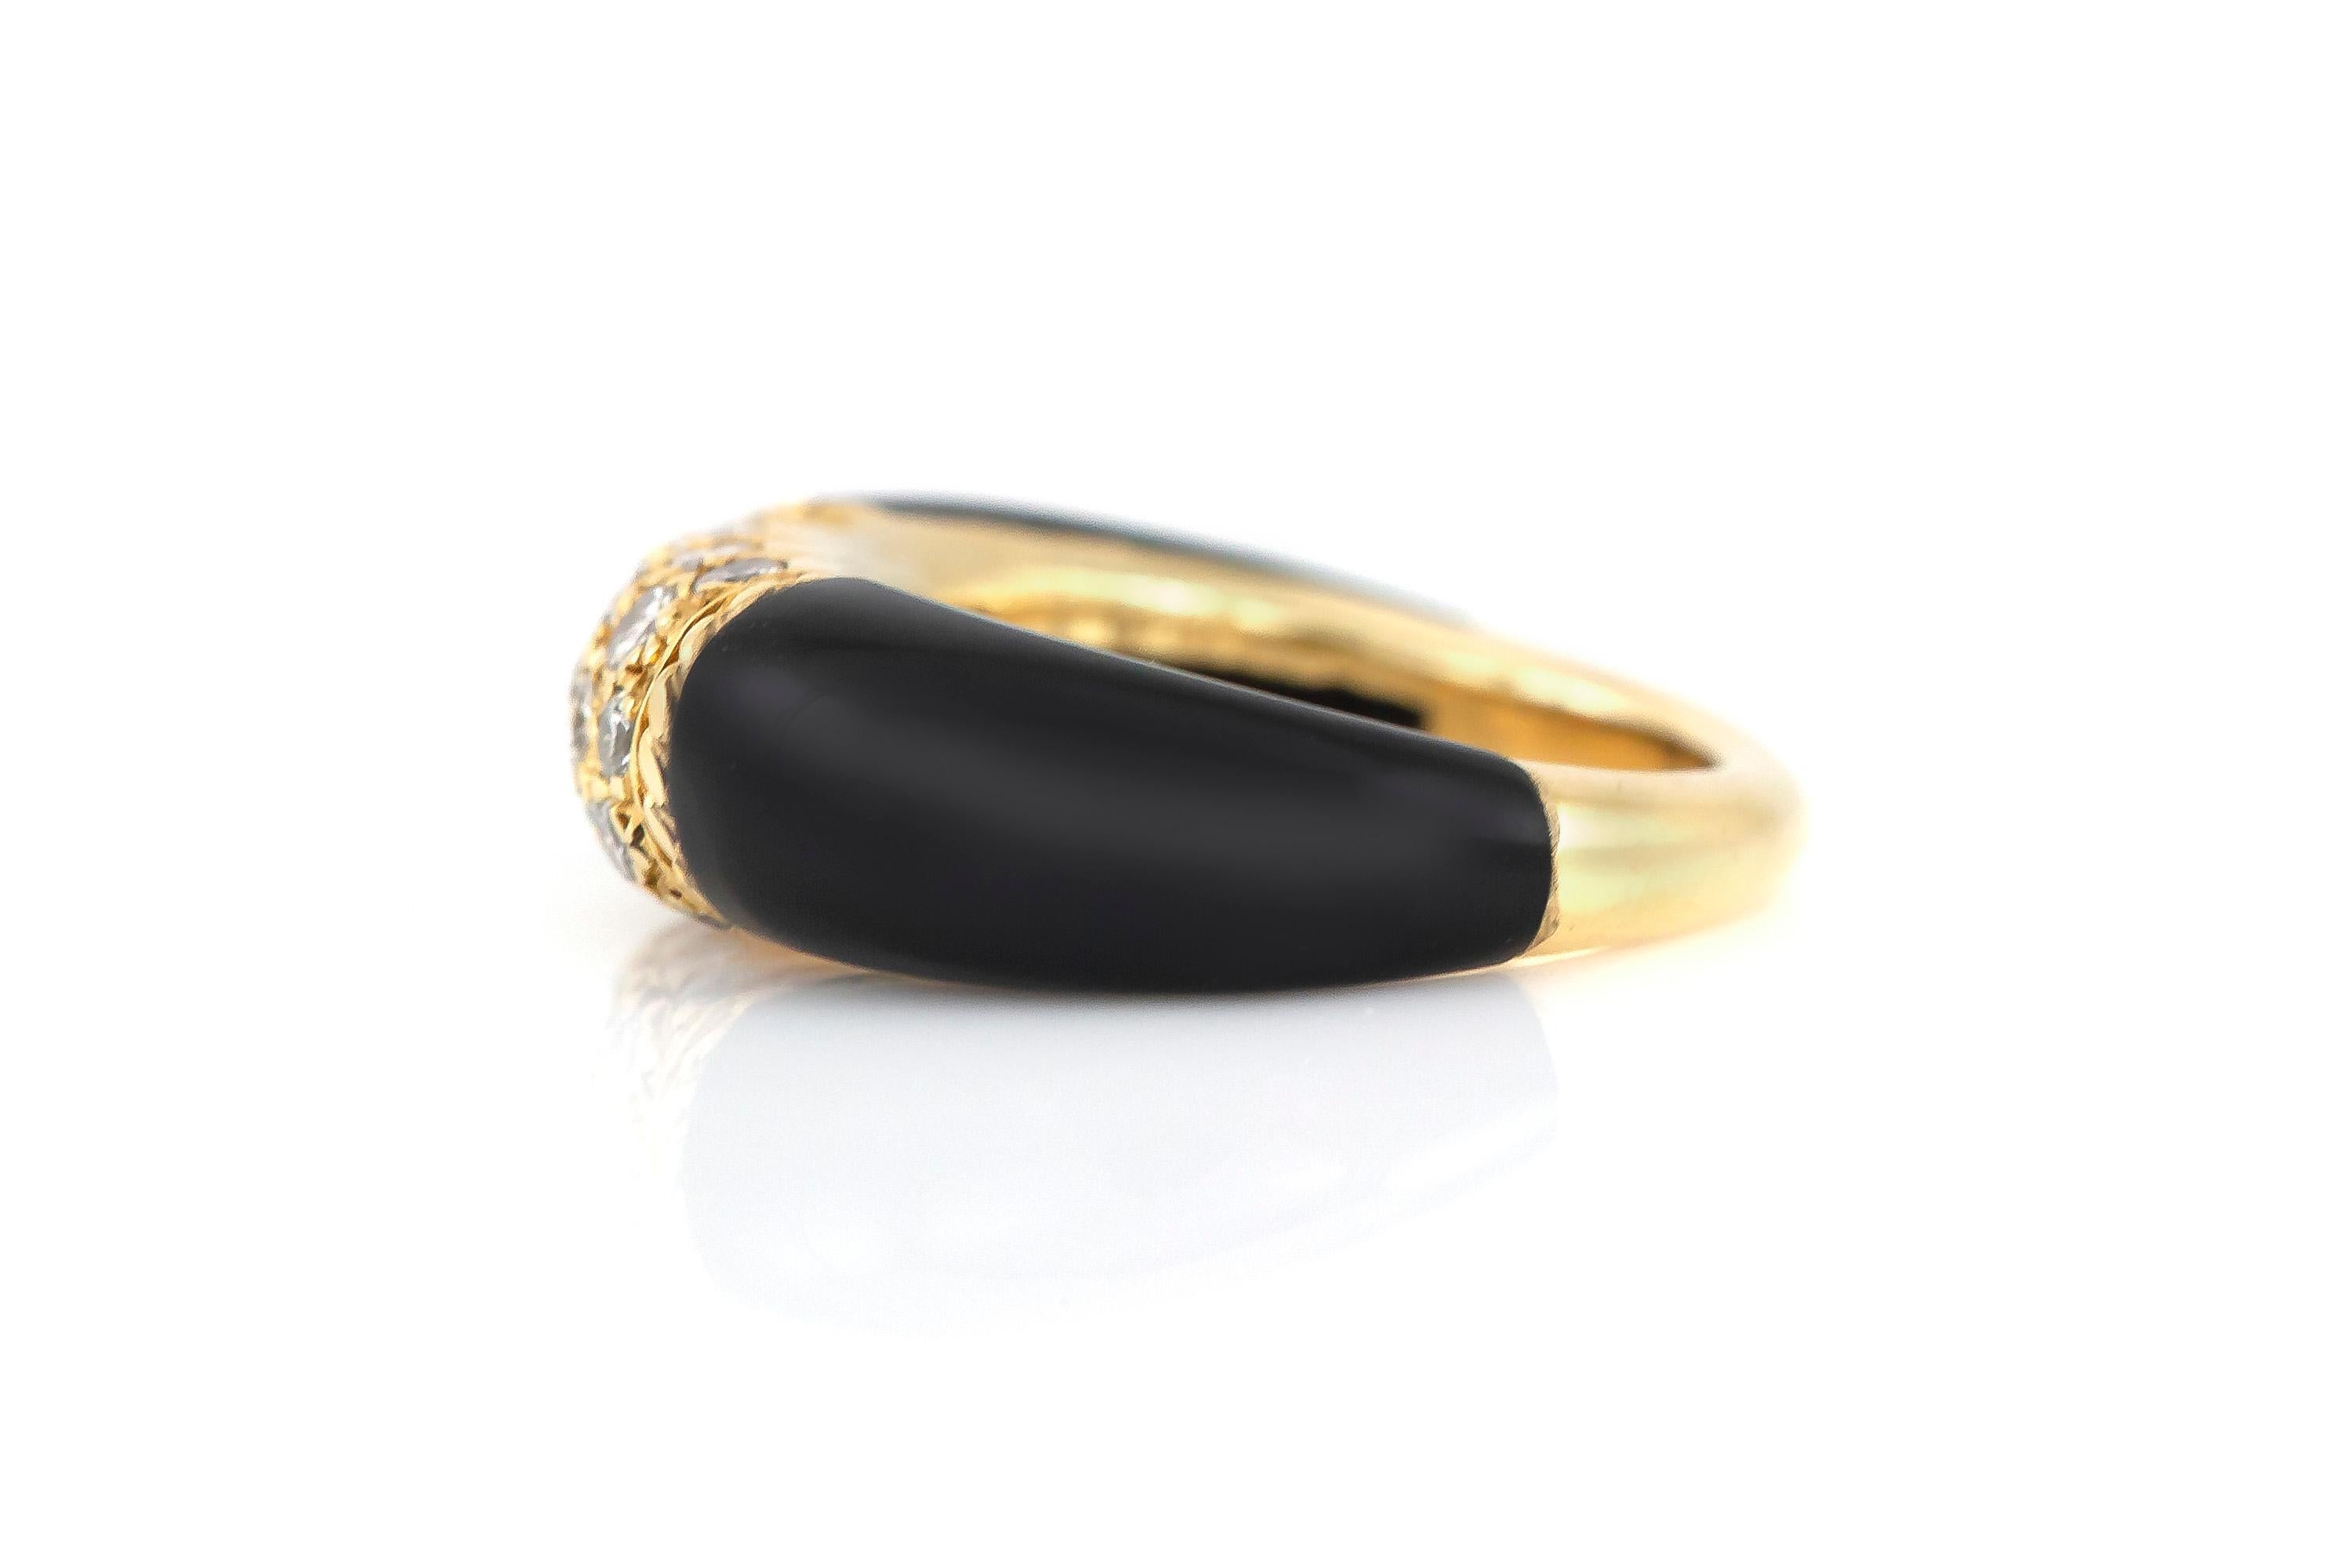 Finely crafted in 18k yellow gold with black onyx and round brilliant cut diamonds weighing approximately a total of 0.50 carat.
Signed by Van Cleef & Arpels
Size 3 1/4
We also have the same model available with Coral and Diamonds, size 5 3/4